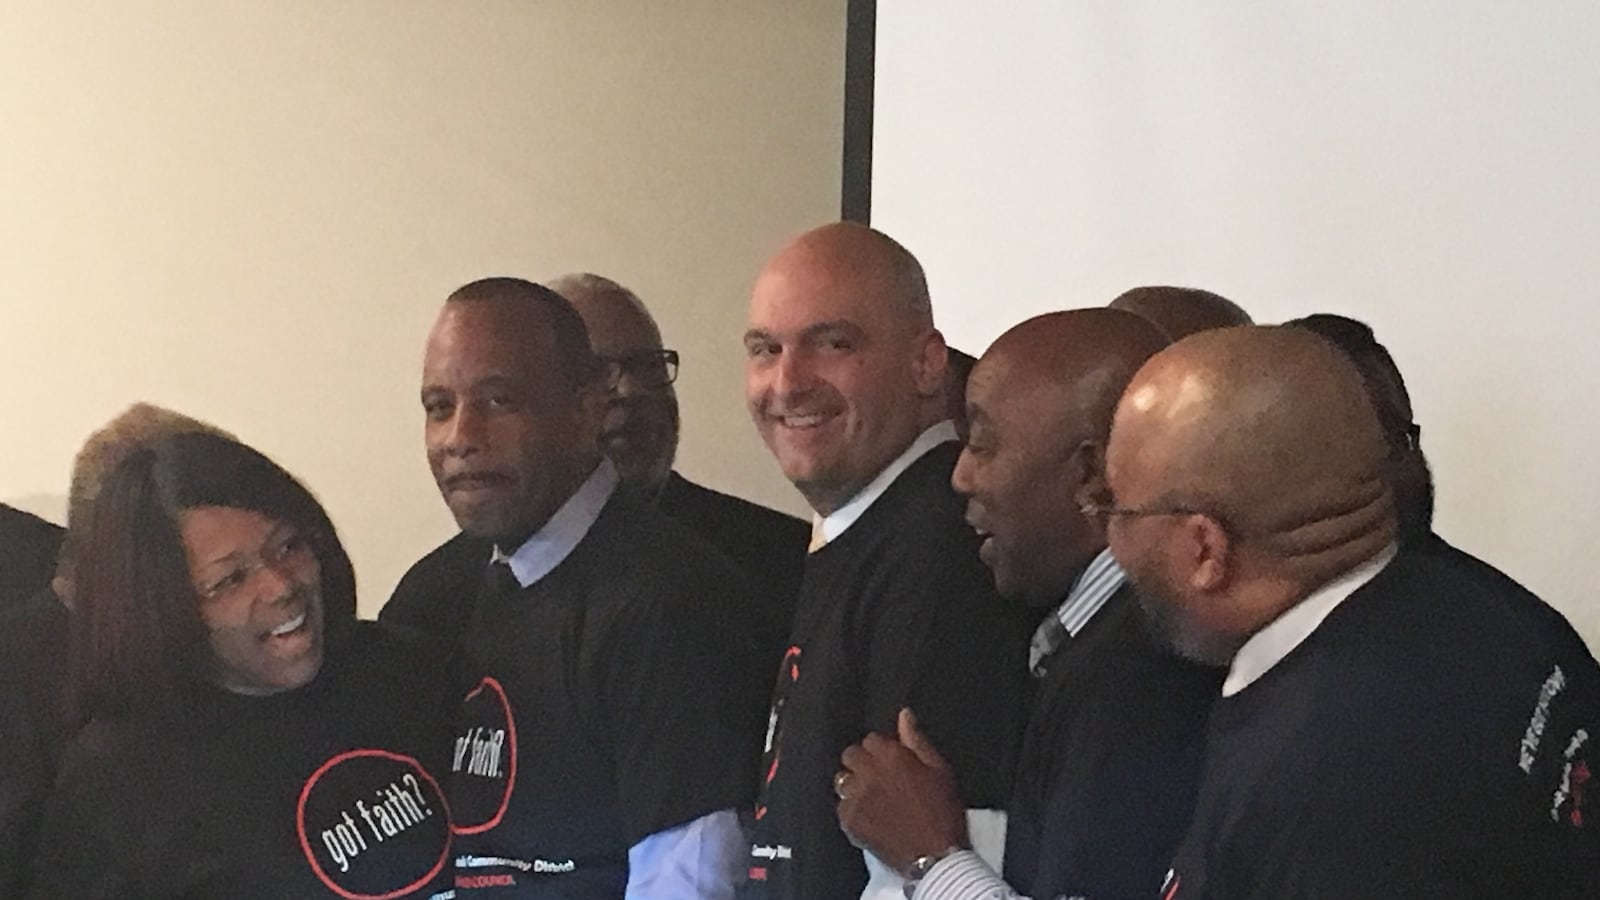 Superintendent Nikolai Vitti surrounded by religious and district leaders wearing new "Got Faith?" shirts.